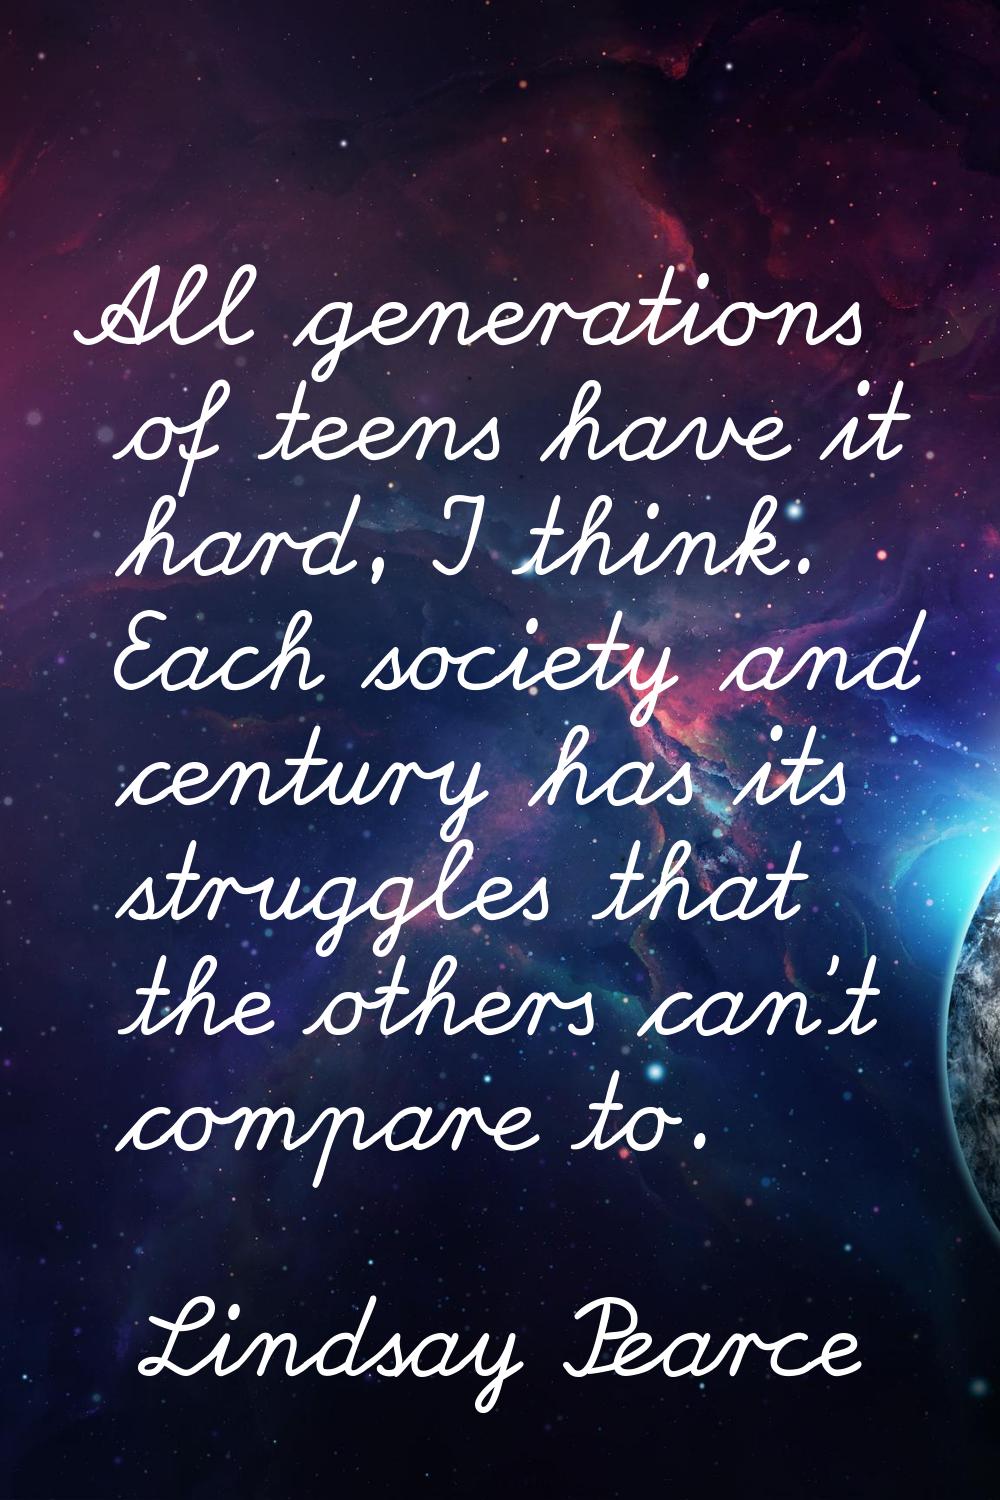 All generations of teens have it hard, I think. Each society and century has its struggles that the